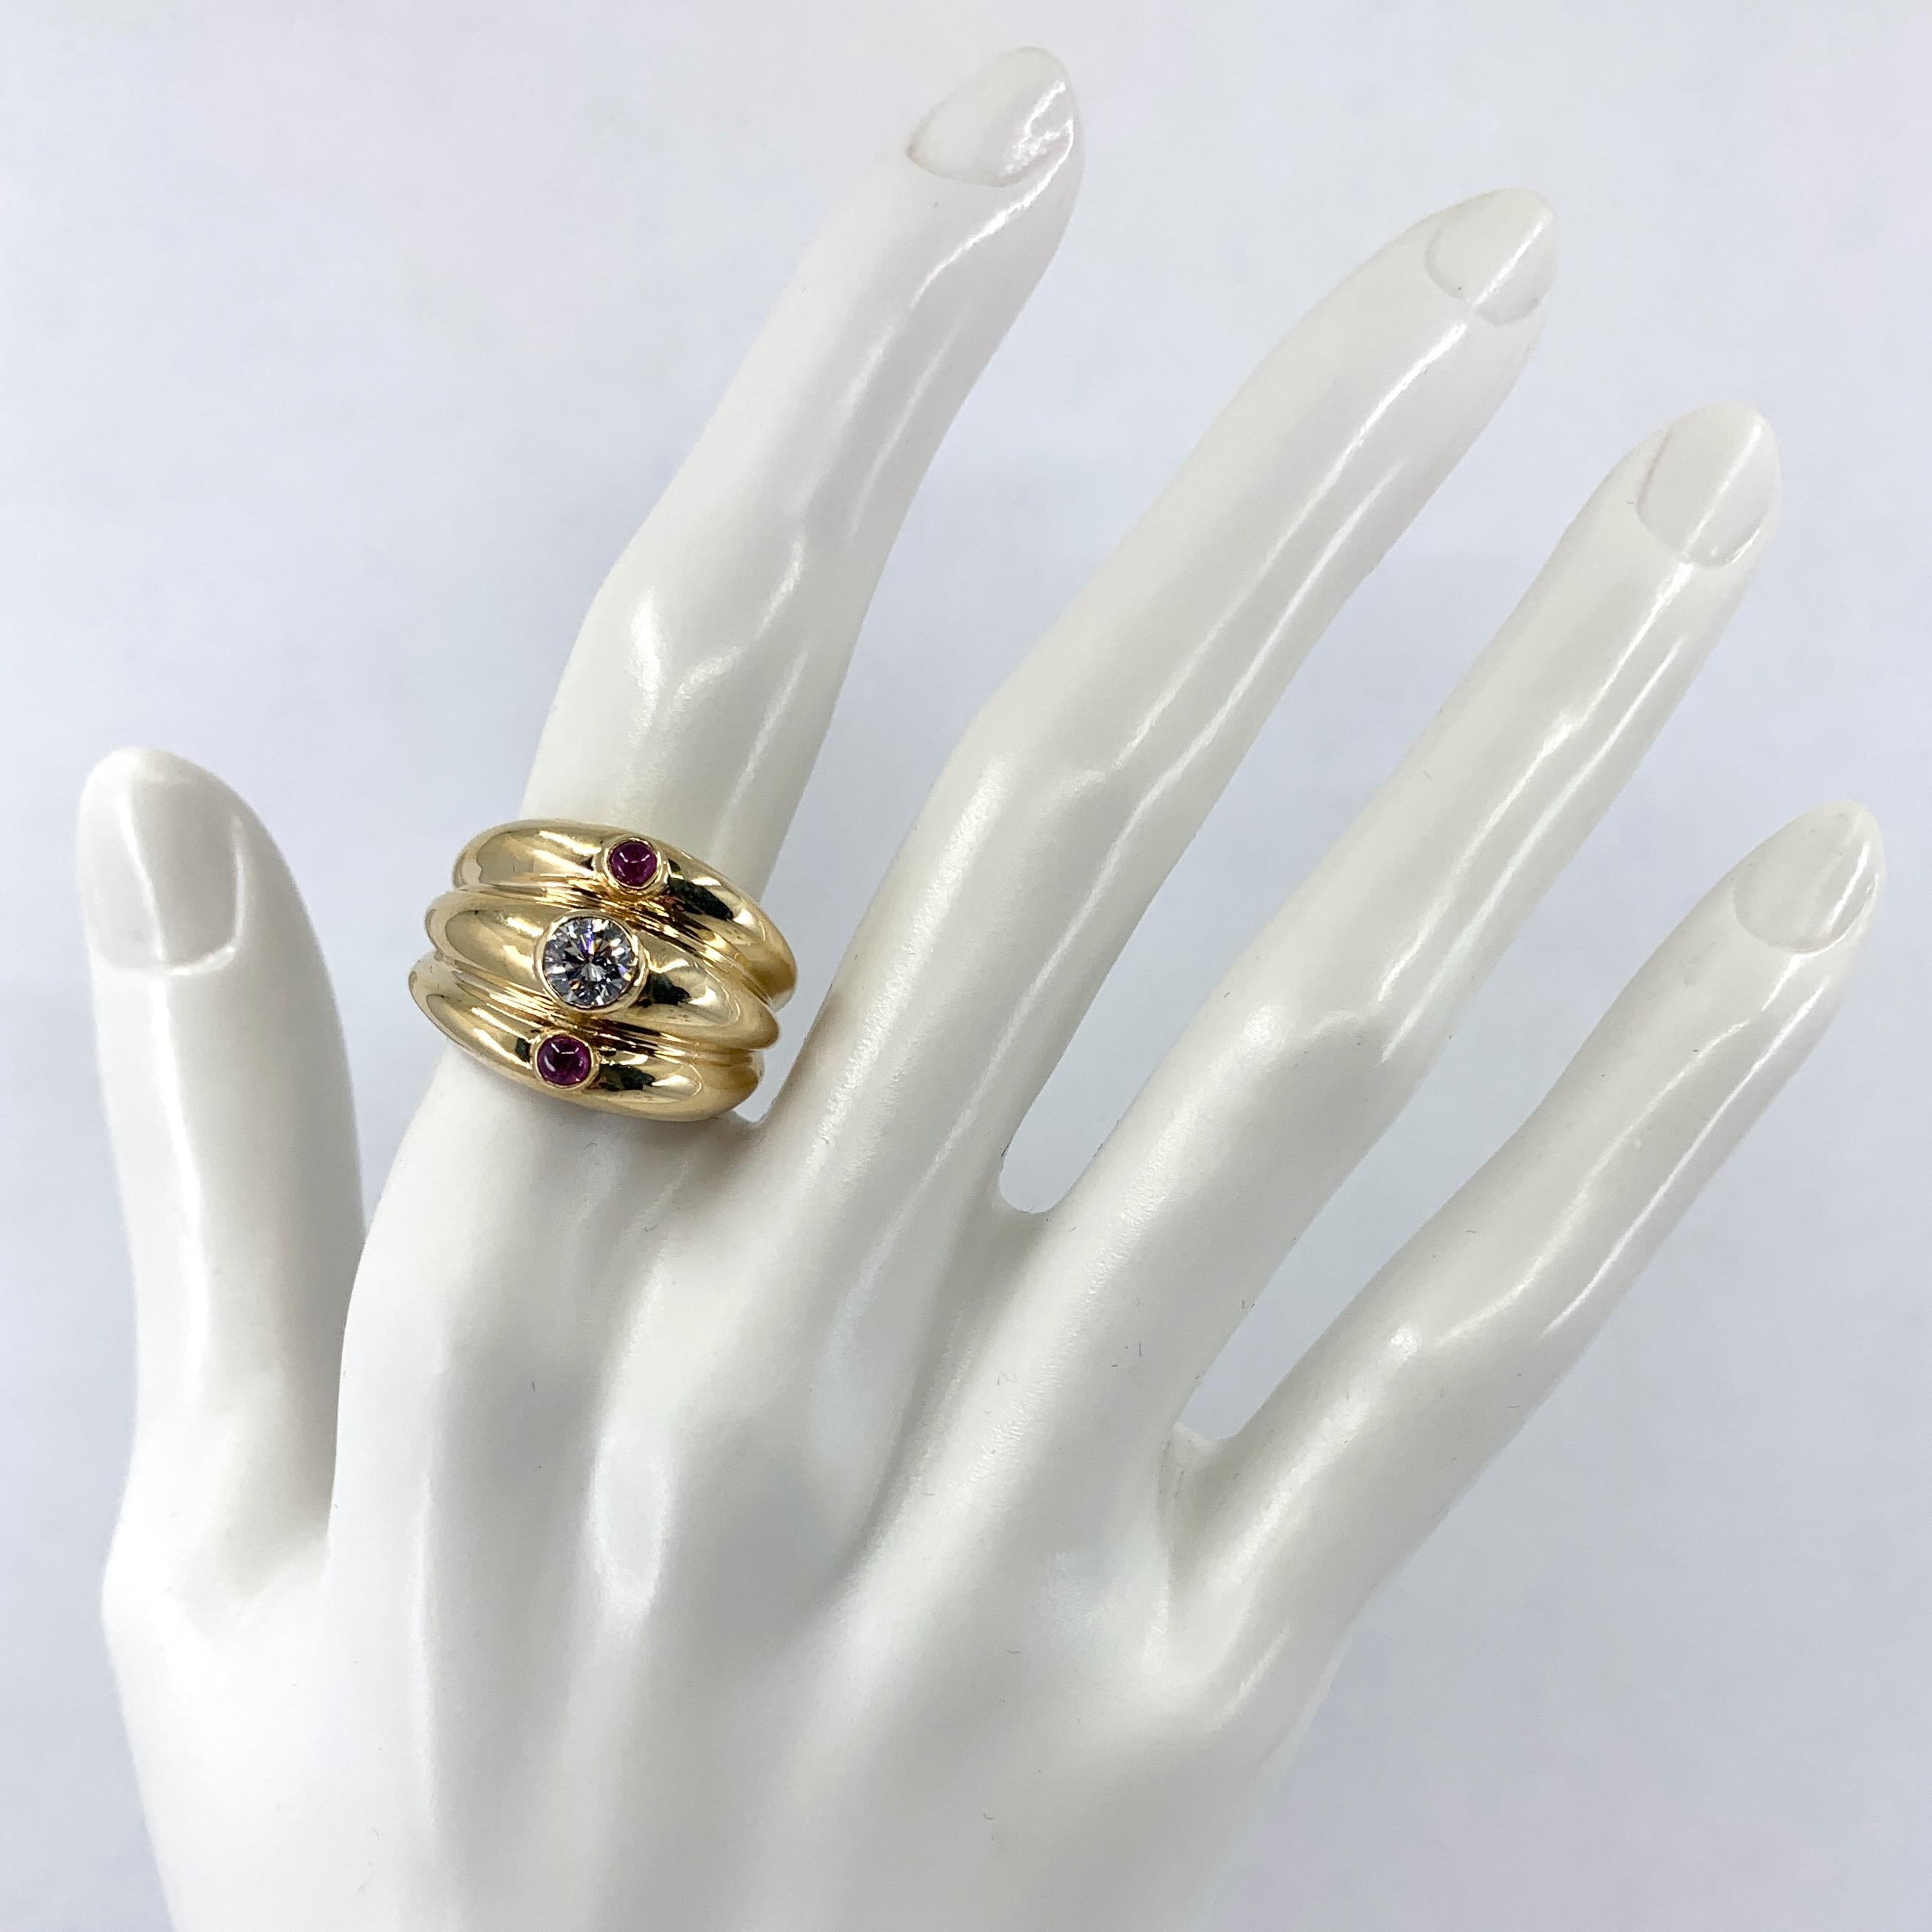 This modern turban in polished 14 karat yellow gold ring by Eytan Brandes is chubby and cheerful, with a clean, bright white half-carat diamond plus two rosy ruby cabochons.  

The three 